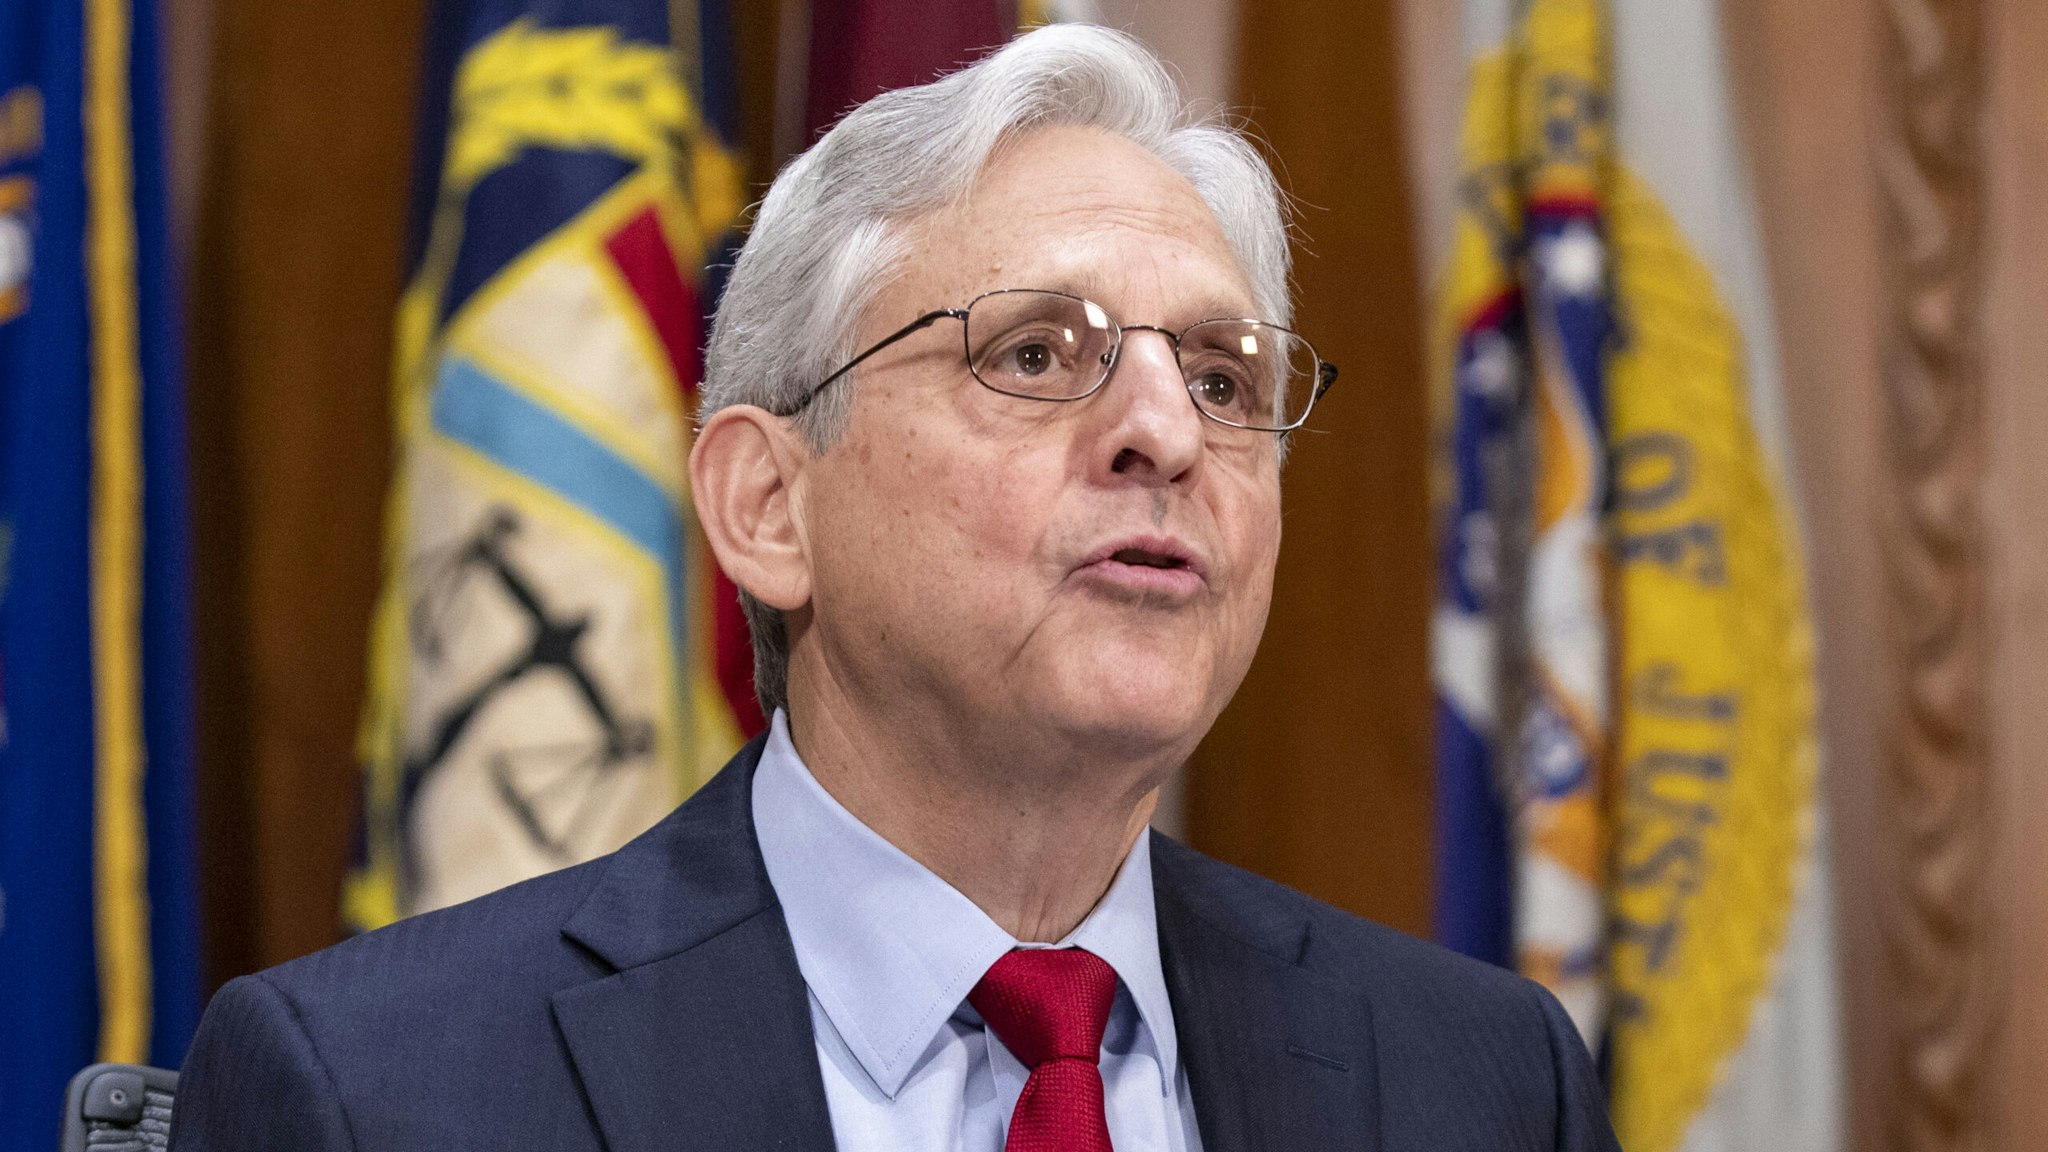 Merrick Garland, US attorney general, speaks during a news conference at the Department of Justice in Washington, DC, US, on Wednesday, Nov. 30, 2022. Stewart Rhodes, leader of the right-wing Oath Keepers group, and one other defendant were convicted yesterday of seditious conspiracy for their roles in the storming of the US Capitol on Jan. 6, 2021, capping a trial of the most serious crimes alleged among the hundreds of people prosecuted.